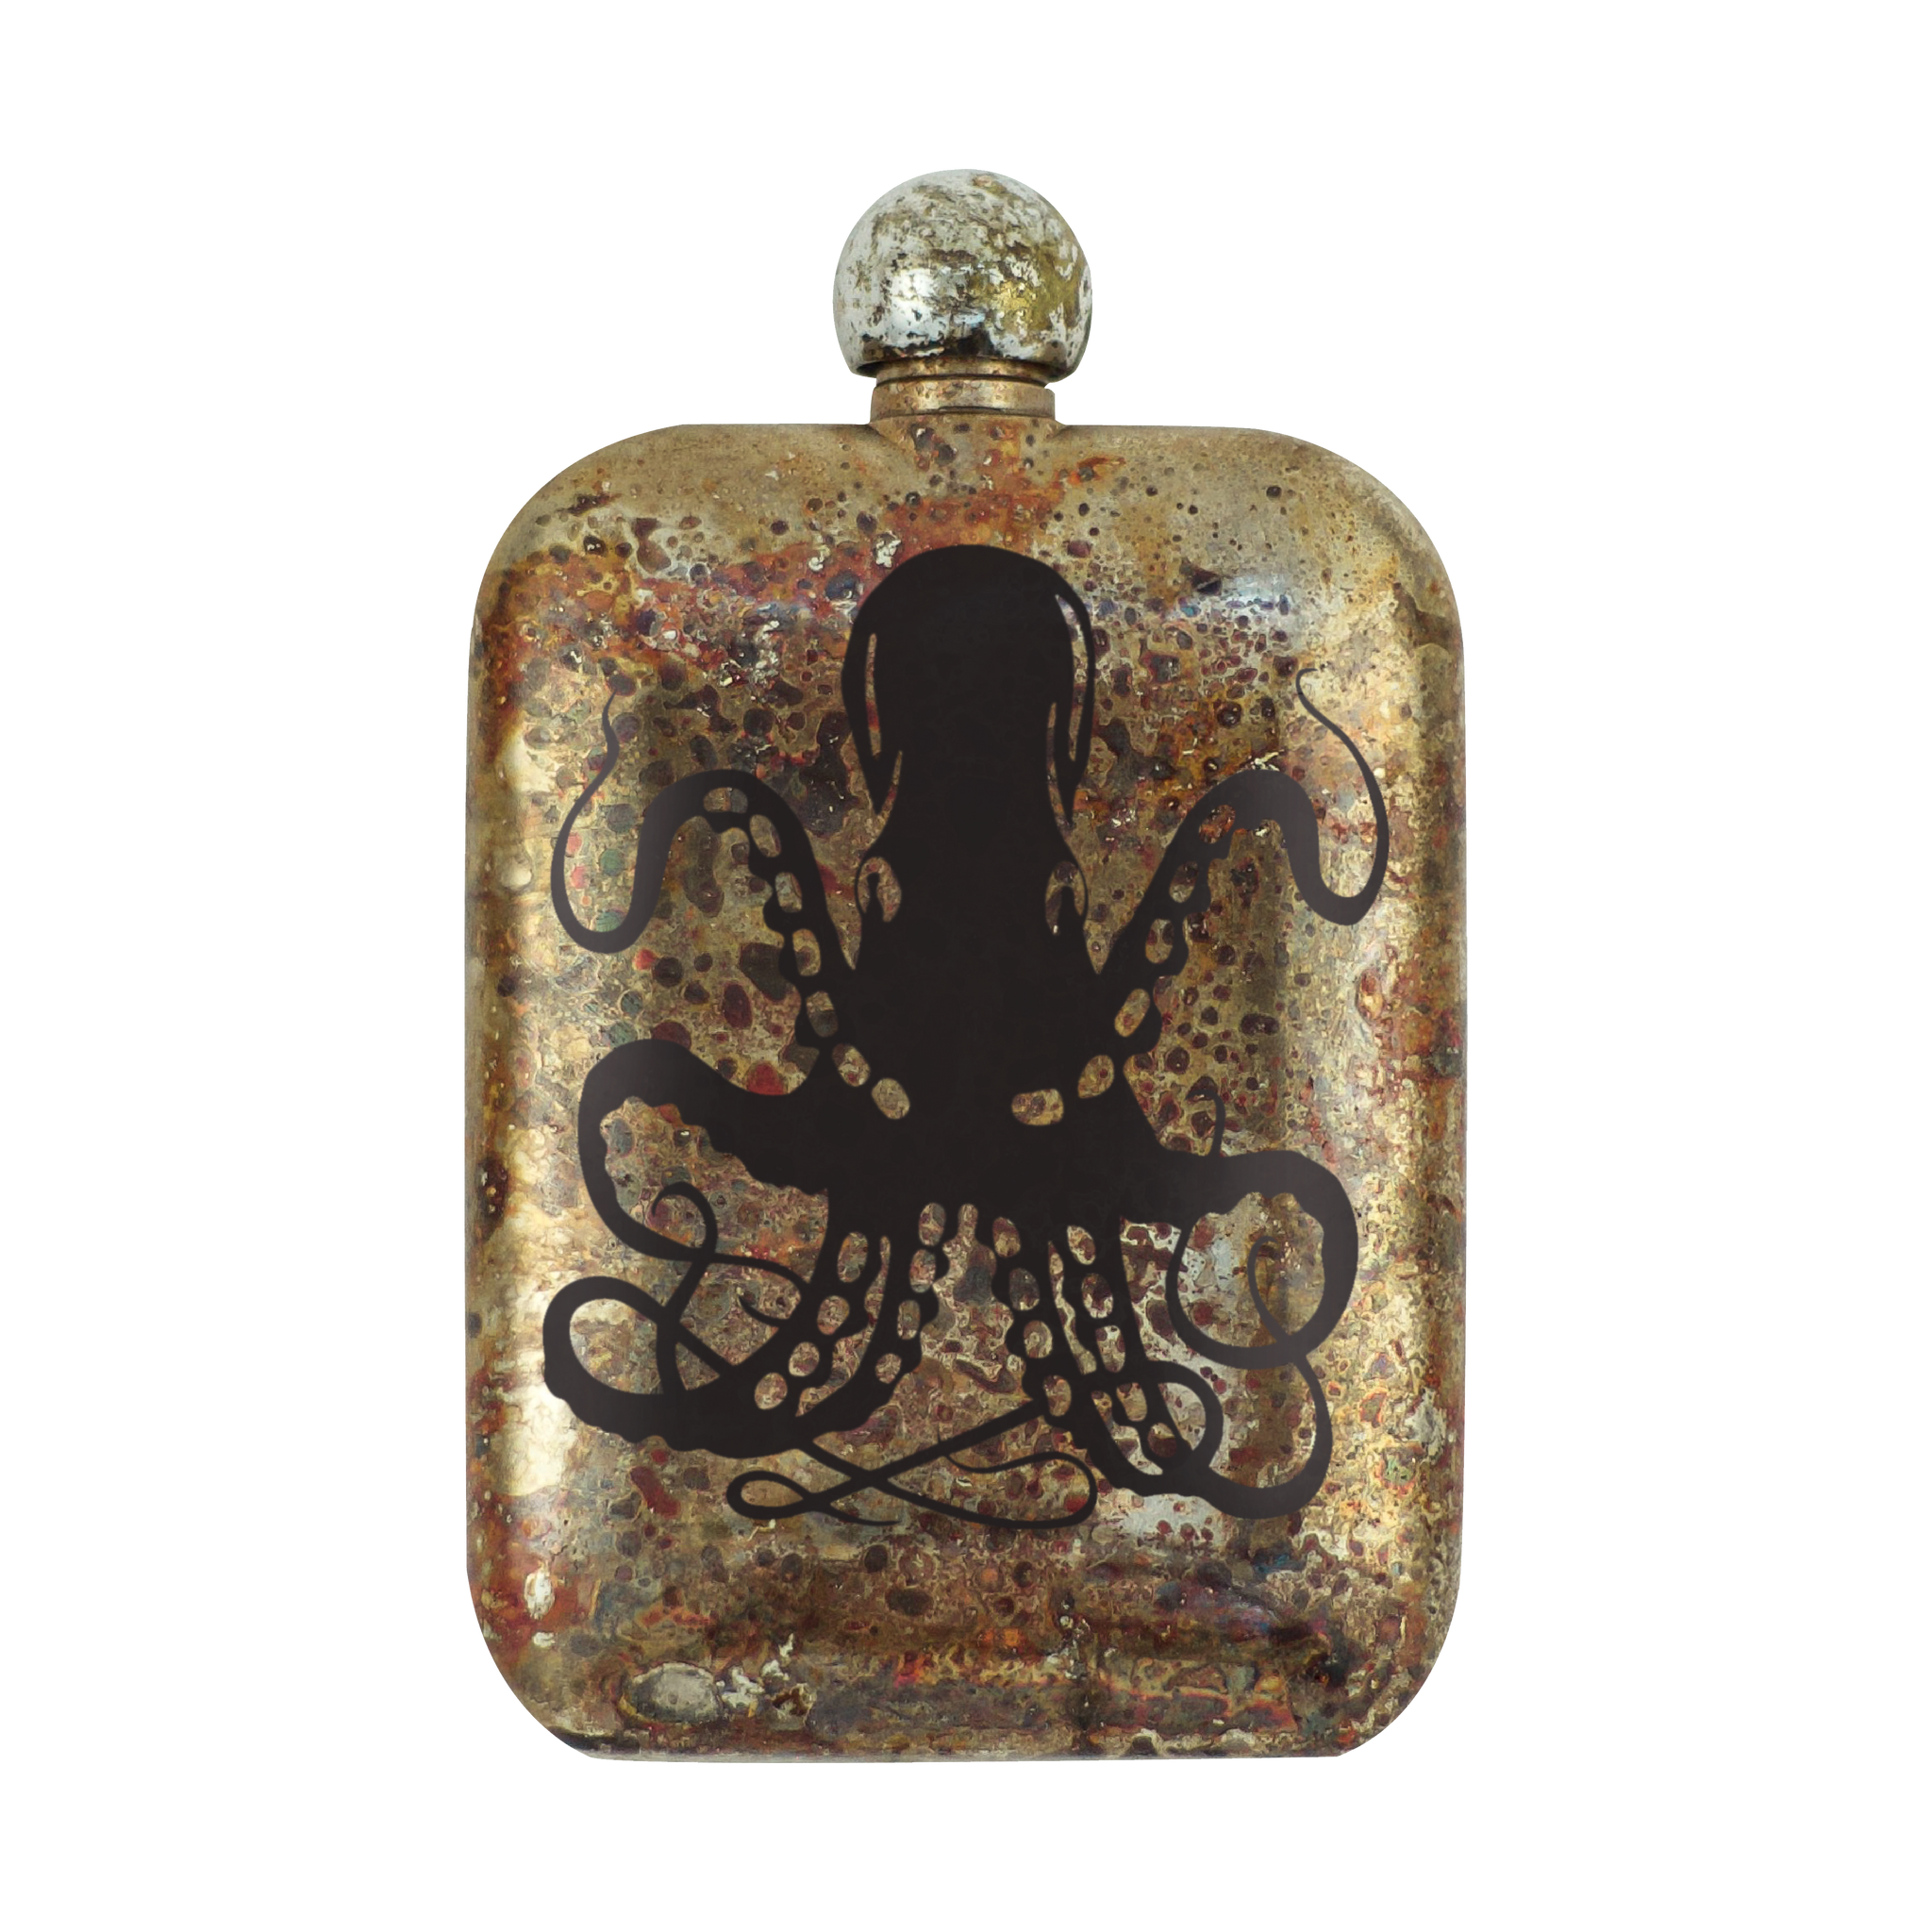 SEA MONSTER NOBLE FLASK by The Sneerwell